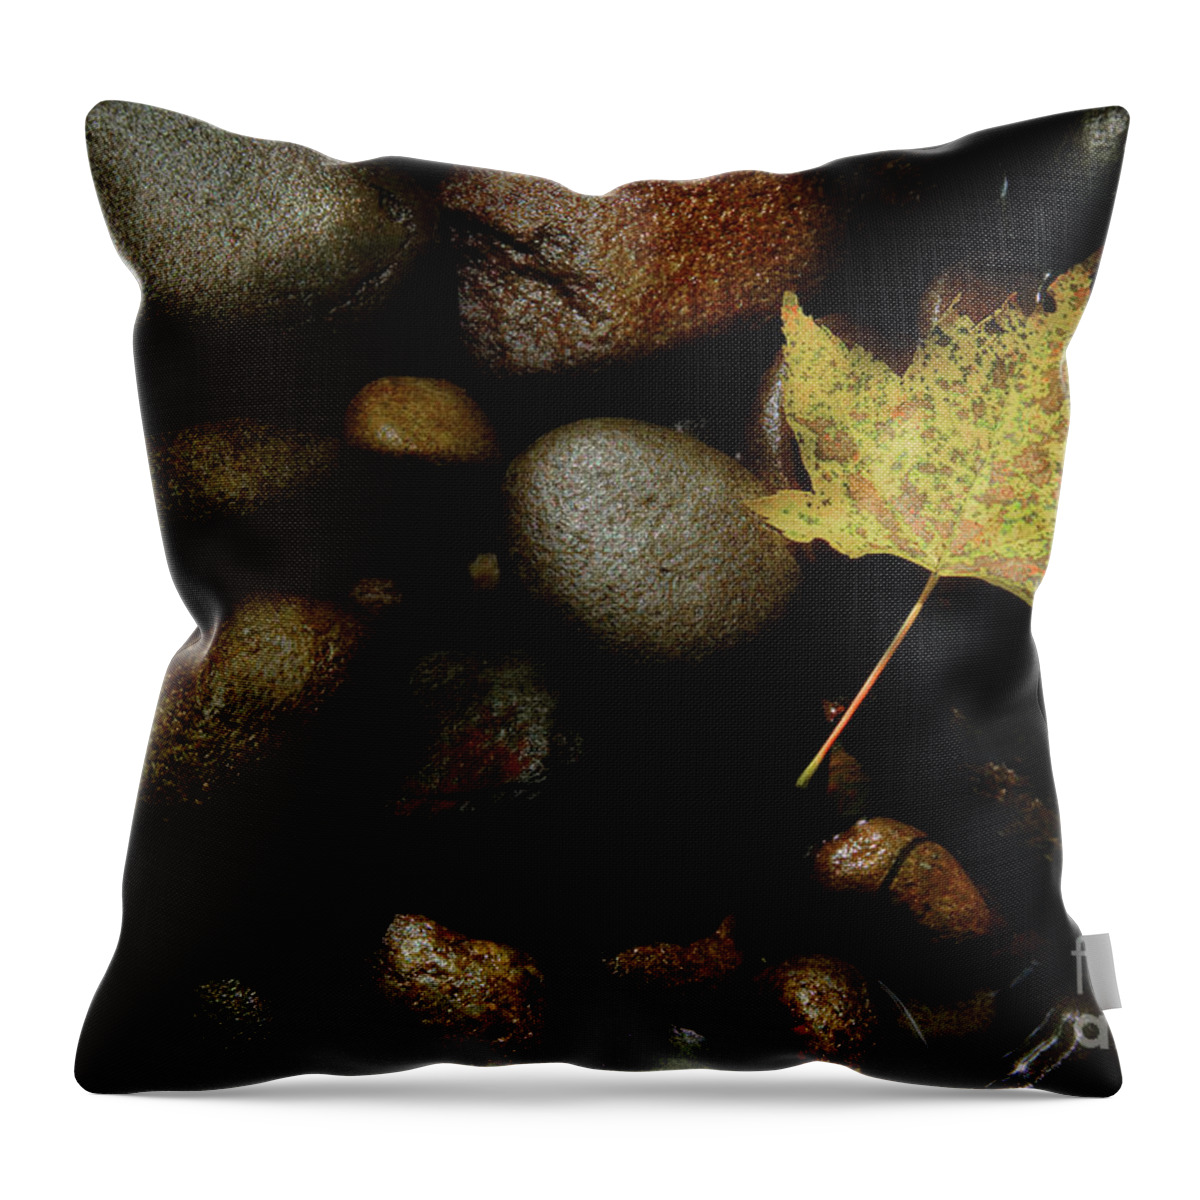 River Rock Throw Pillow featuring the photograph River Bottom by Michael Eingle